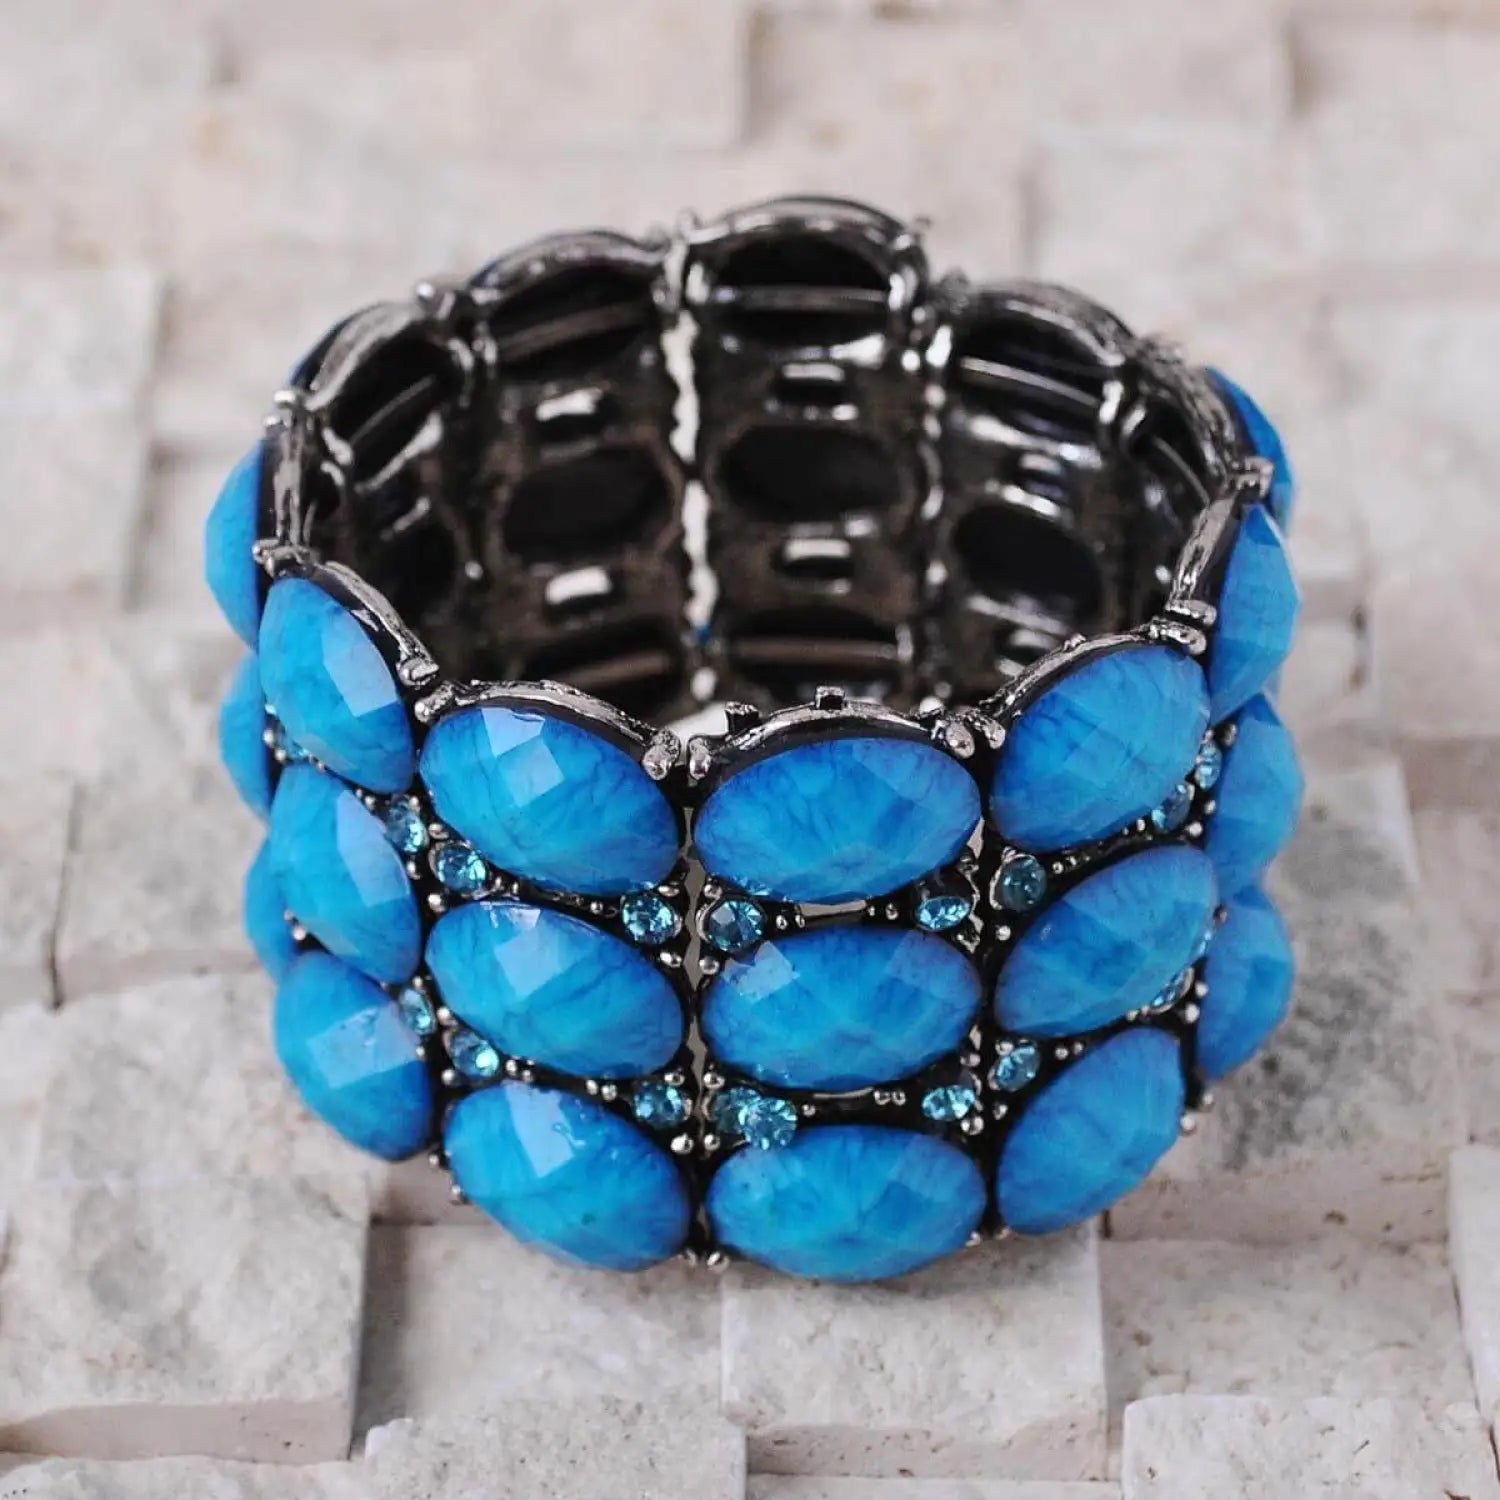 Chunky vivid metal bracelet with black crystals and silver accents